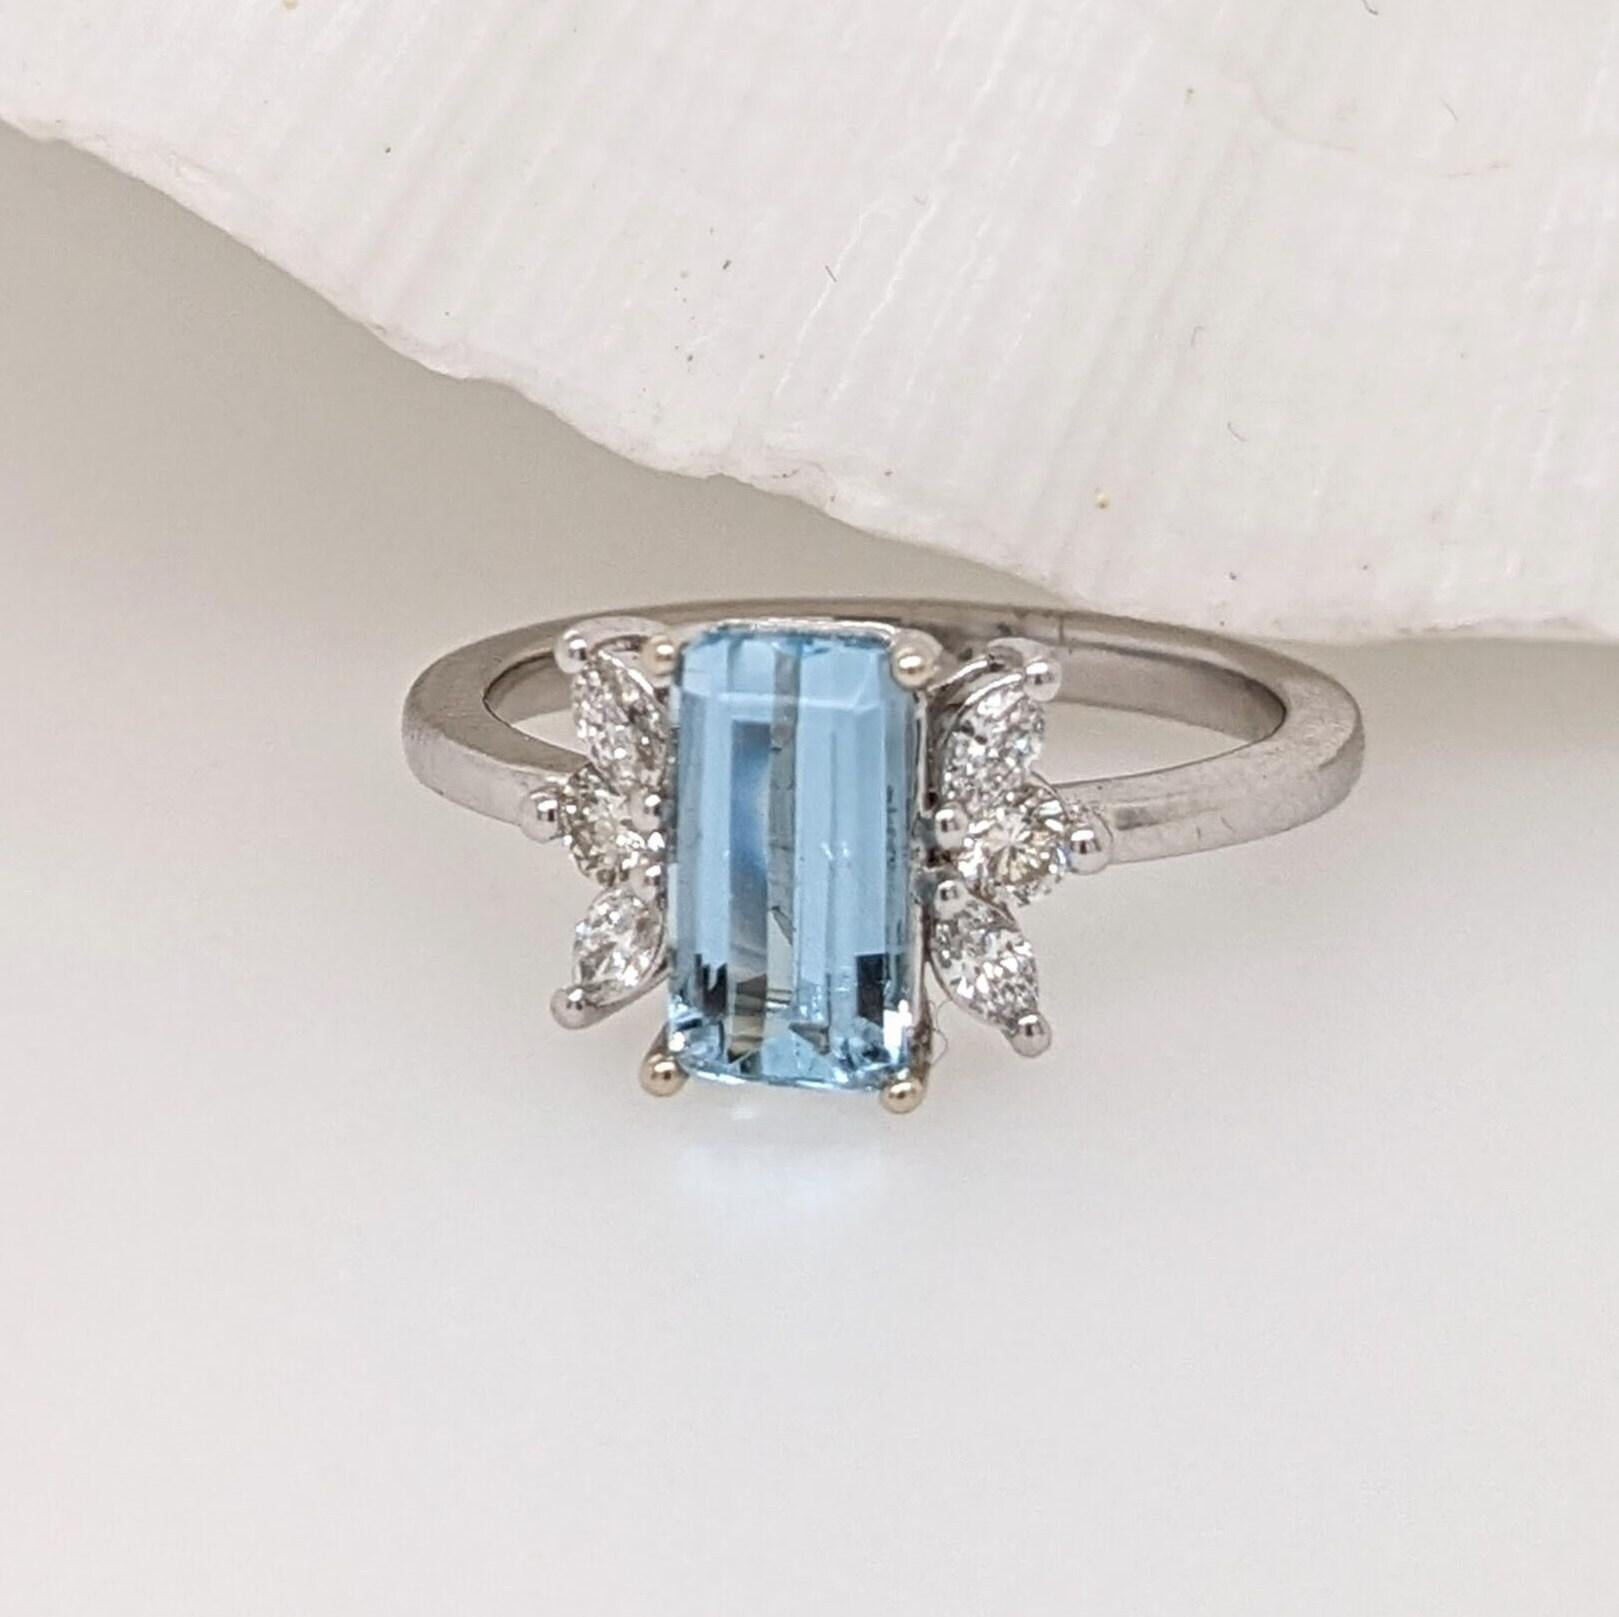 This beautiful ring features an emerald cut sparkling Aquamarine in 14k white gold with a lovely halo of natural diamonds. A statement ring design perfect for an eye catching engagement or anniversary. This ring also makes a beautiful birthstone